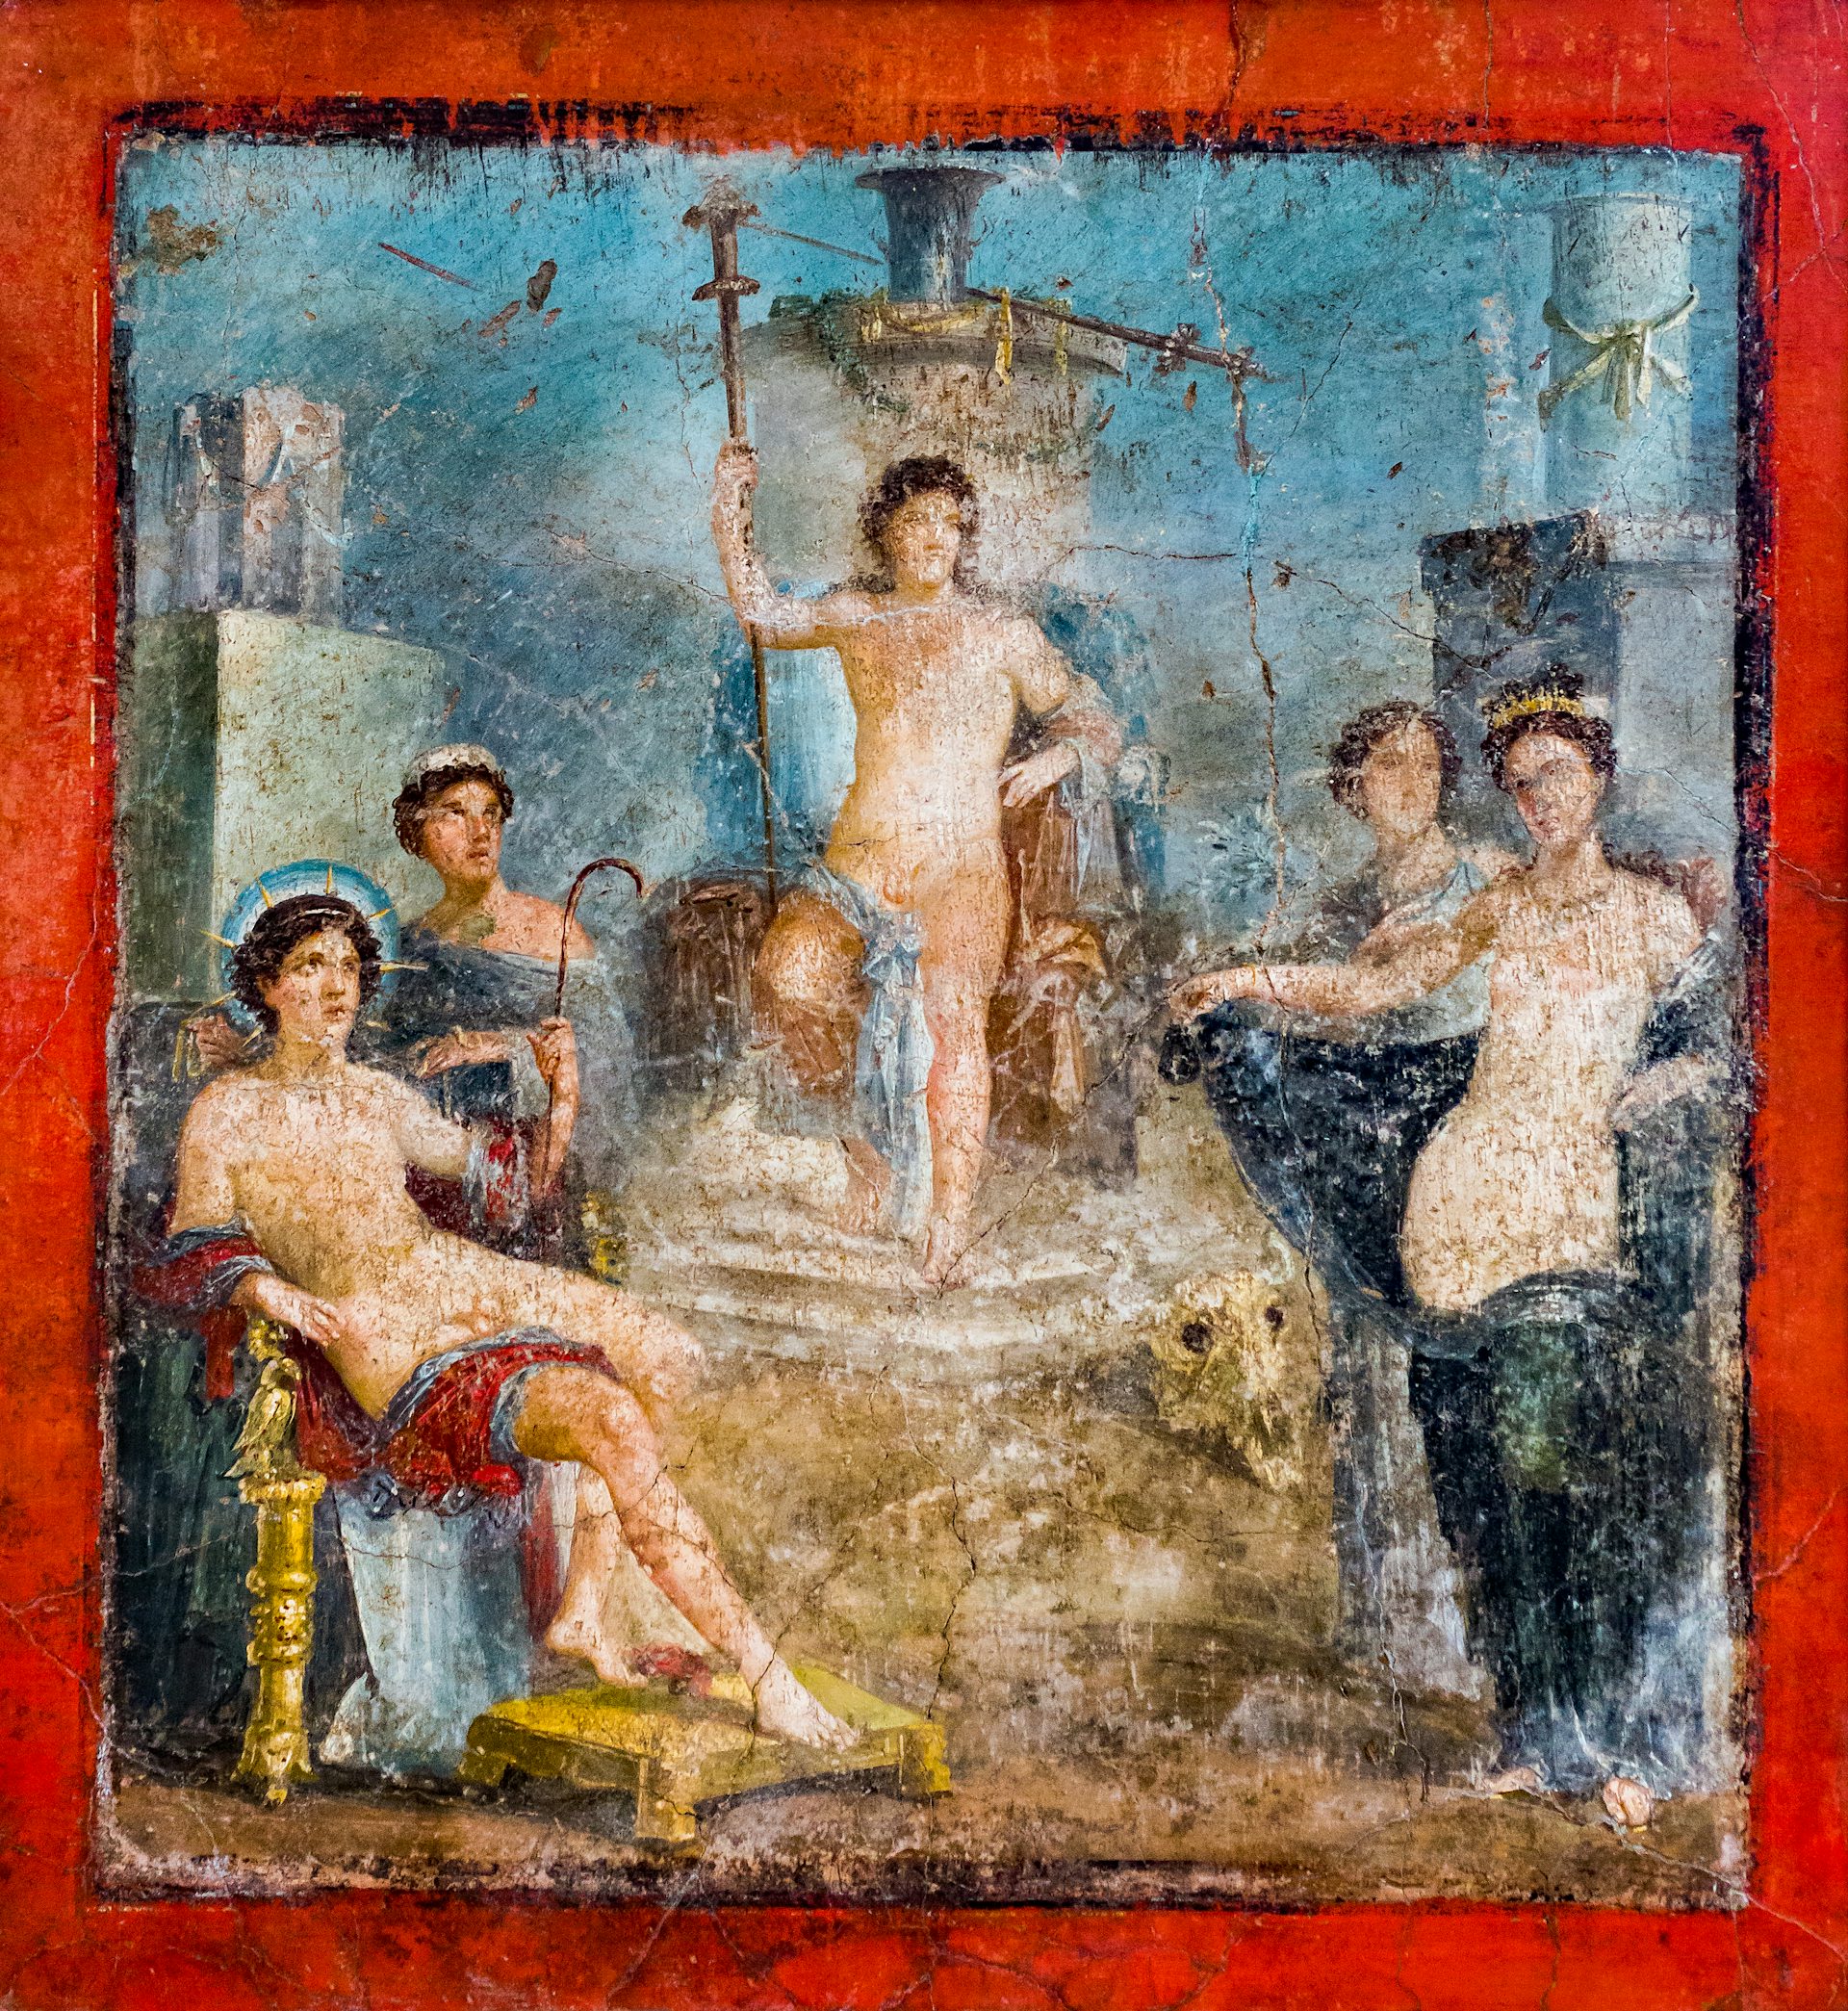 Wall painting of Bacchus, Venus, Sol, and other gods